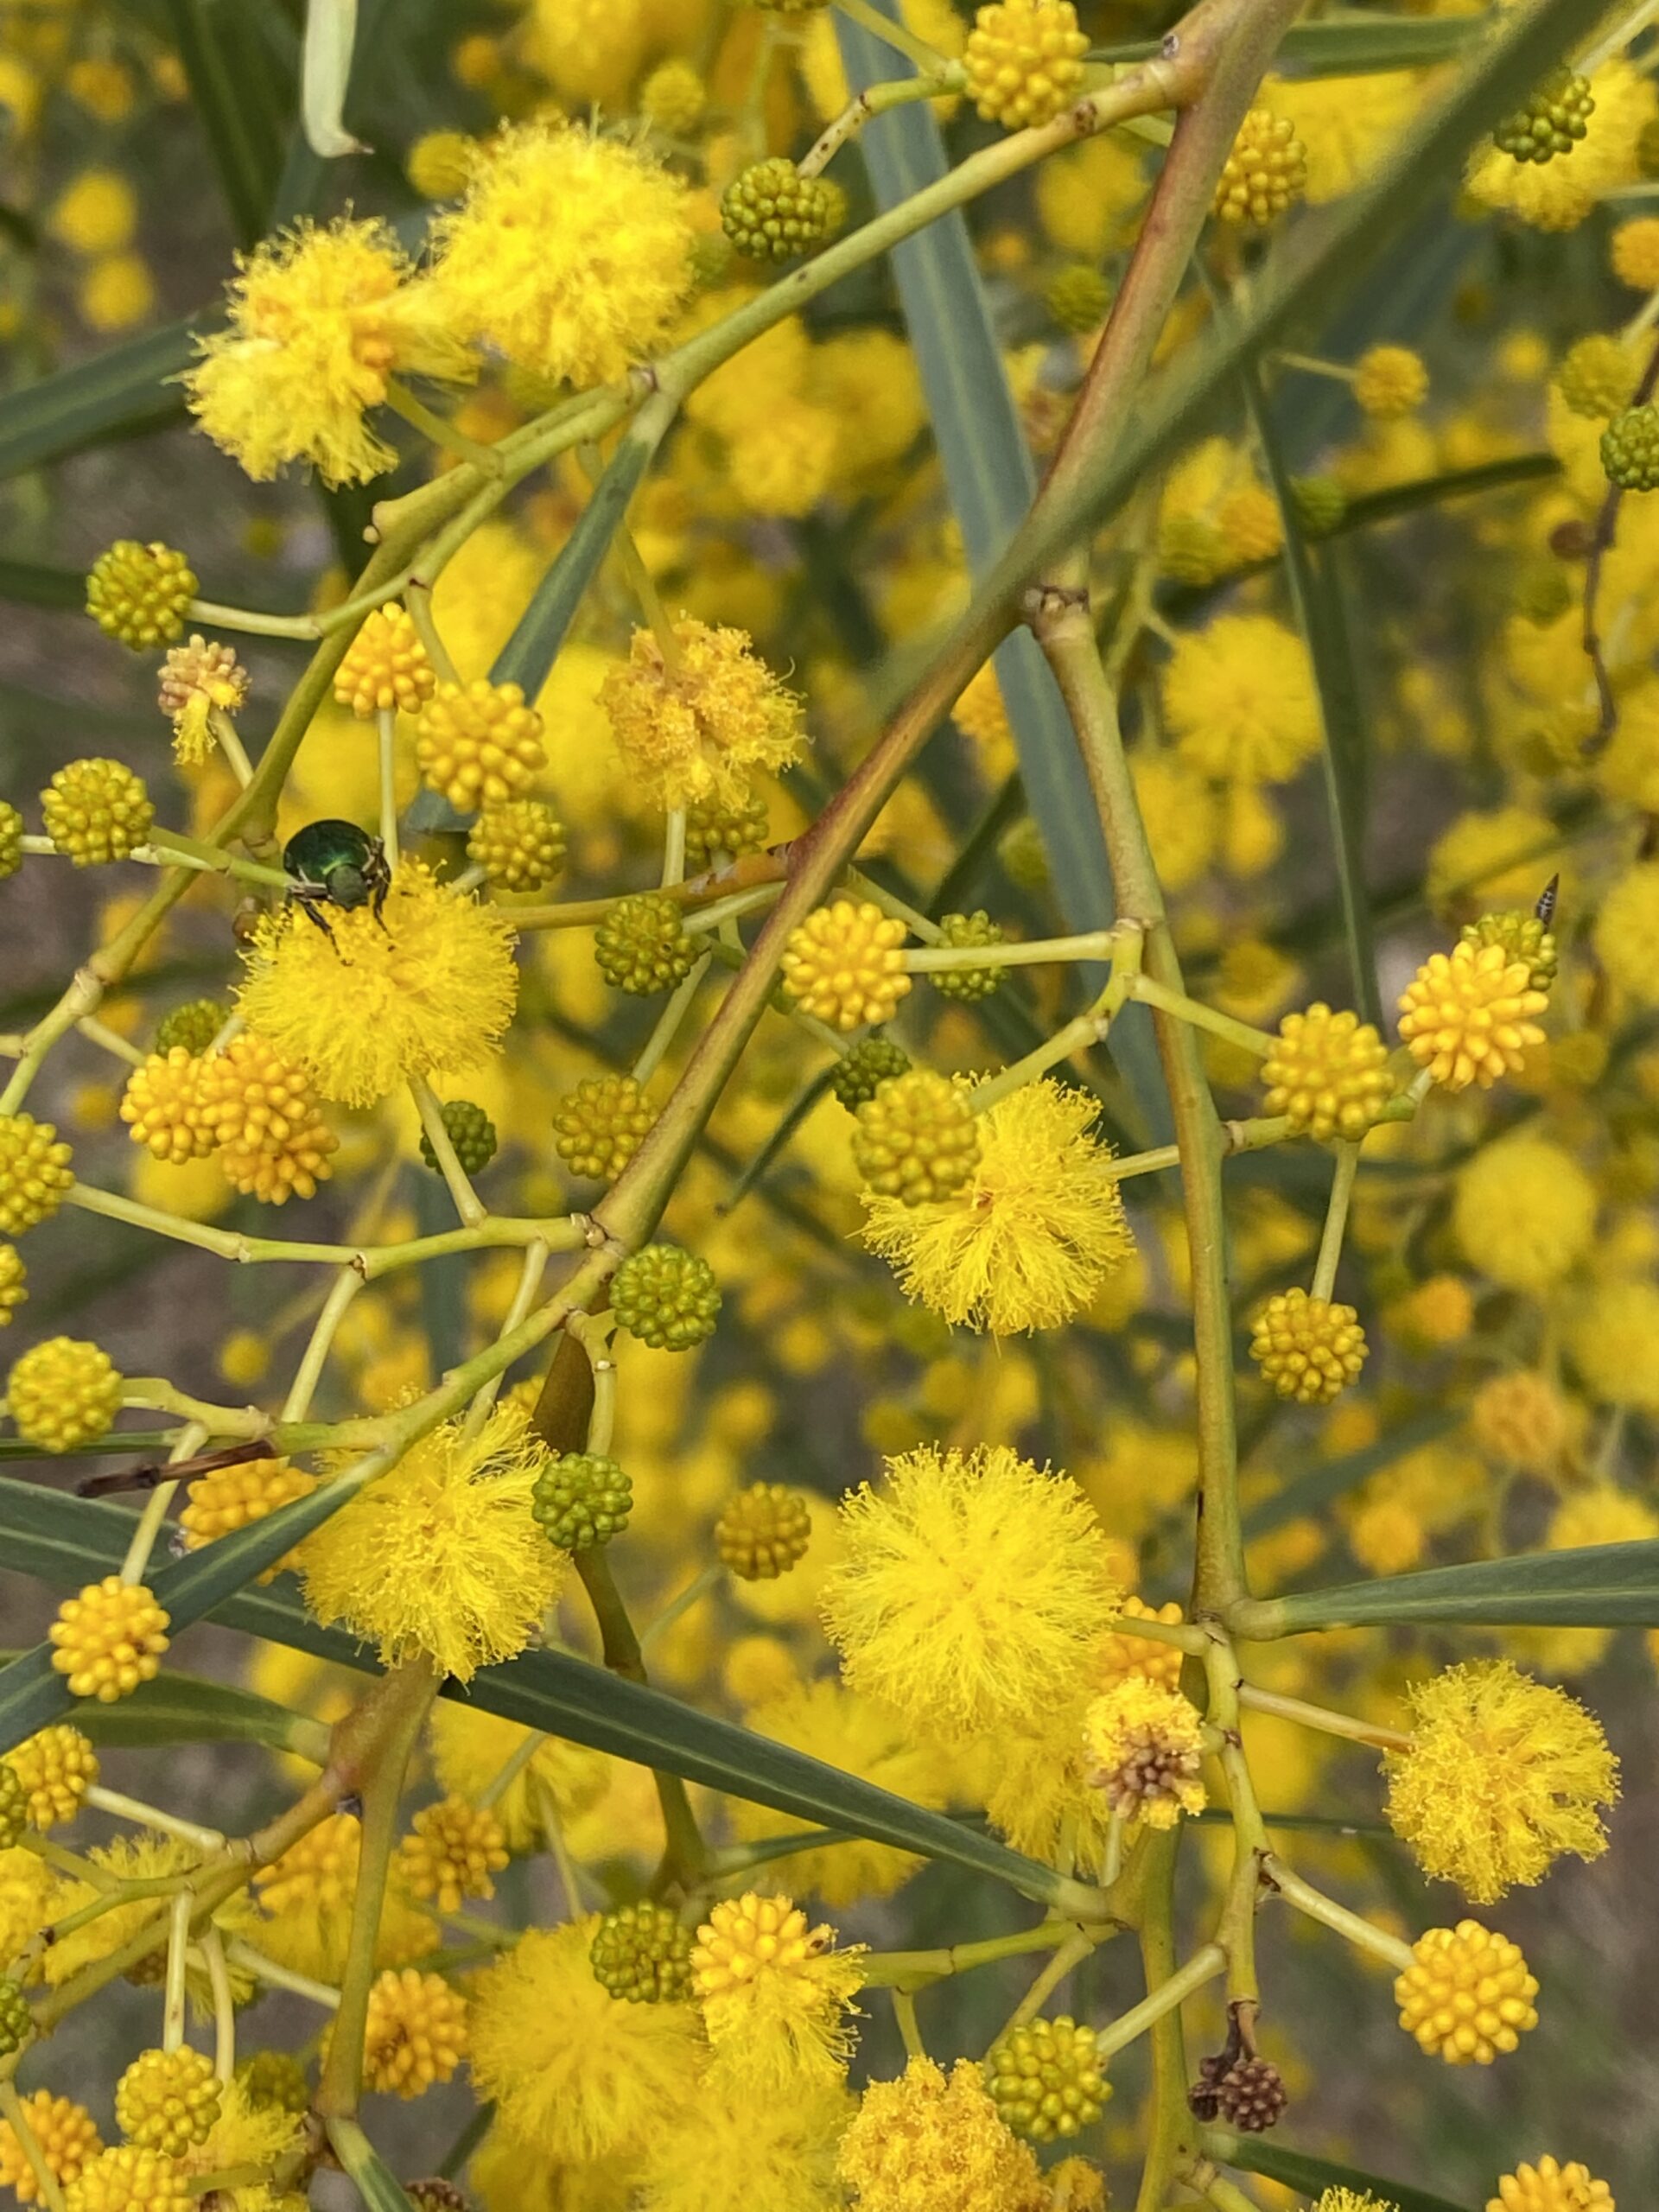 Anthea Harris – The history of Wattle Day